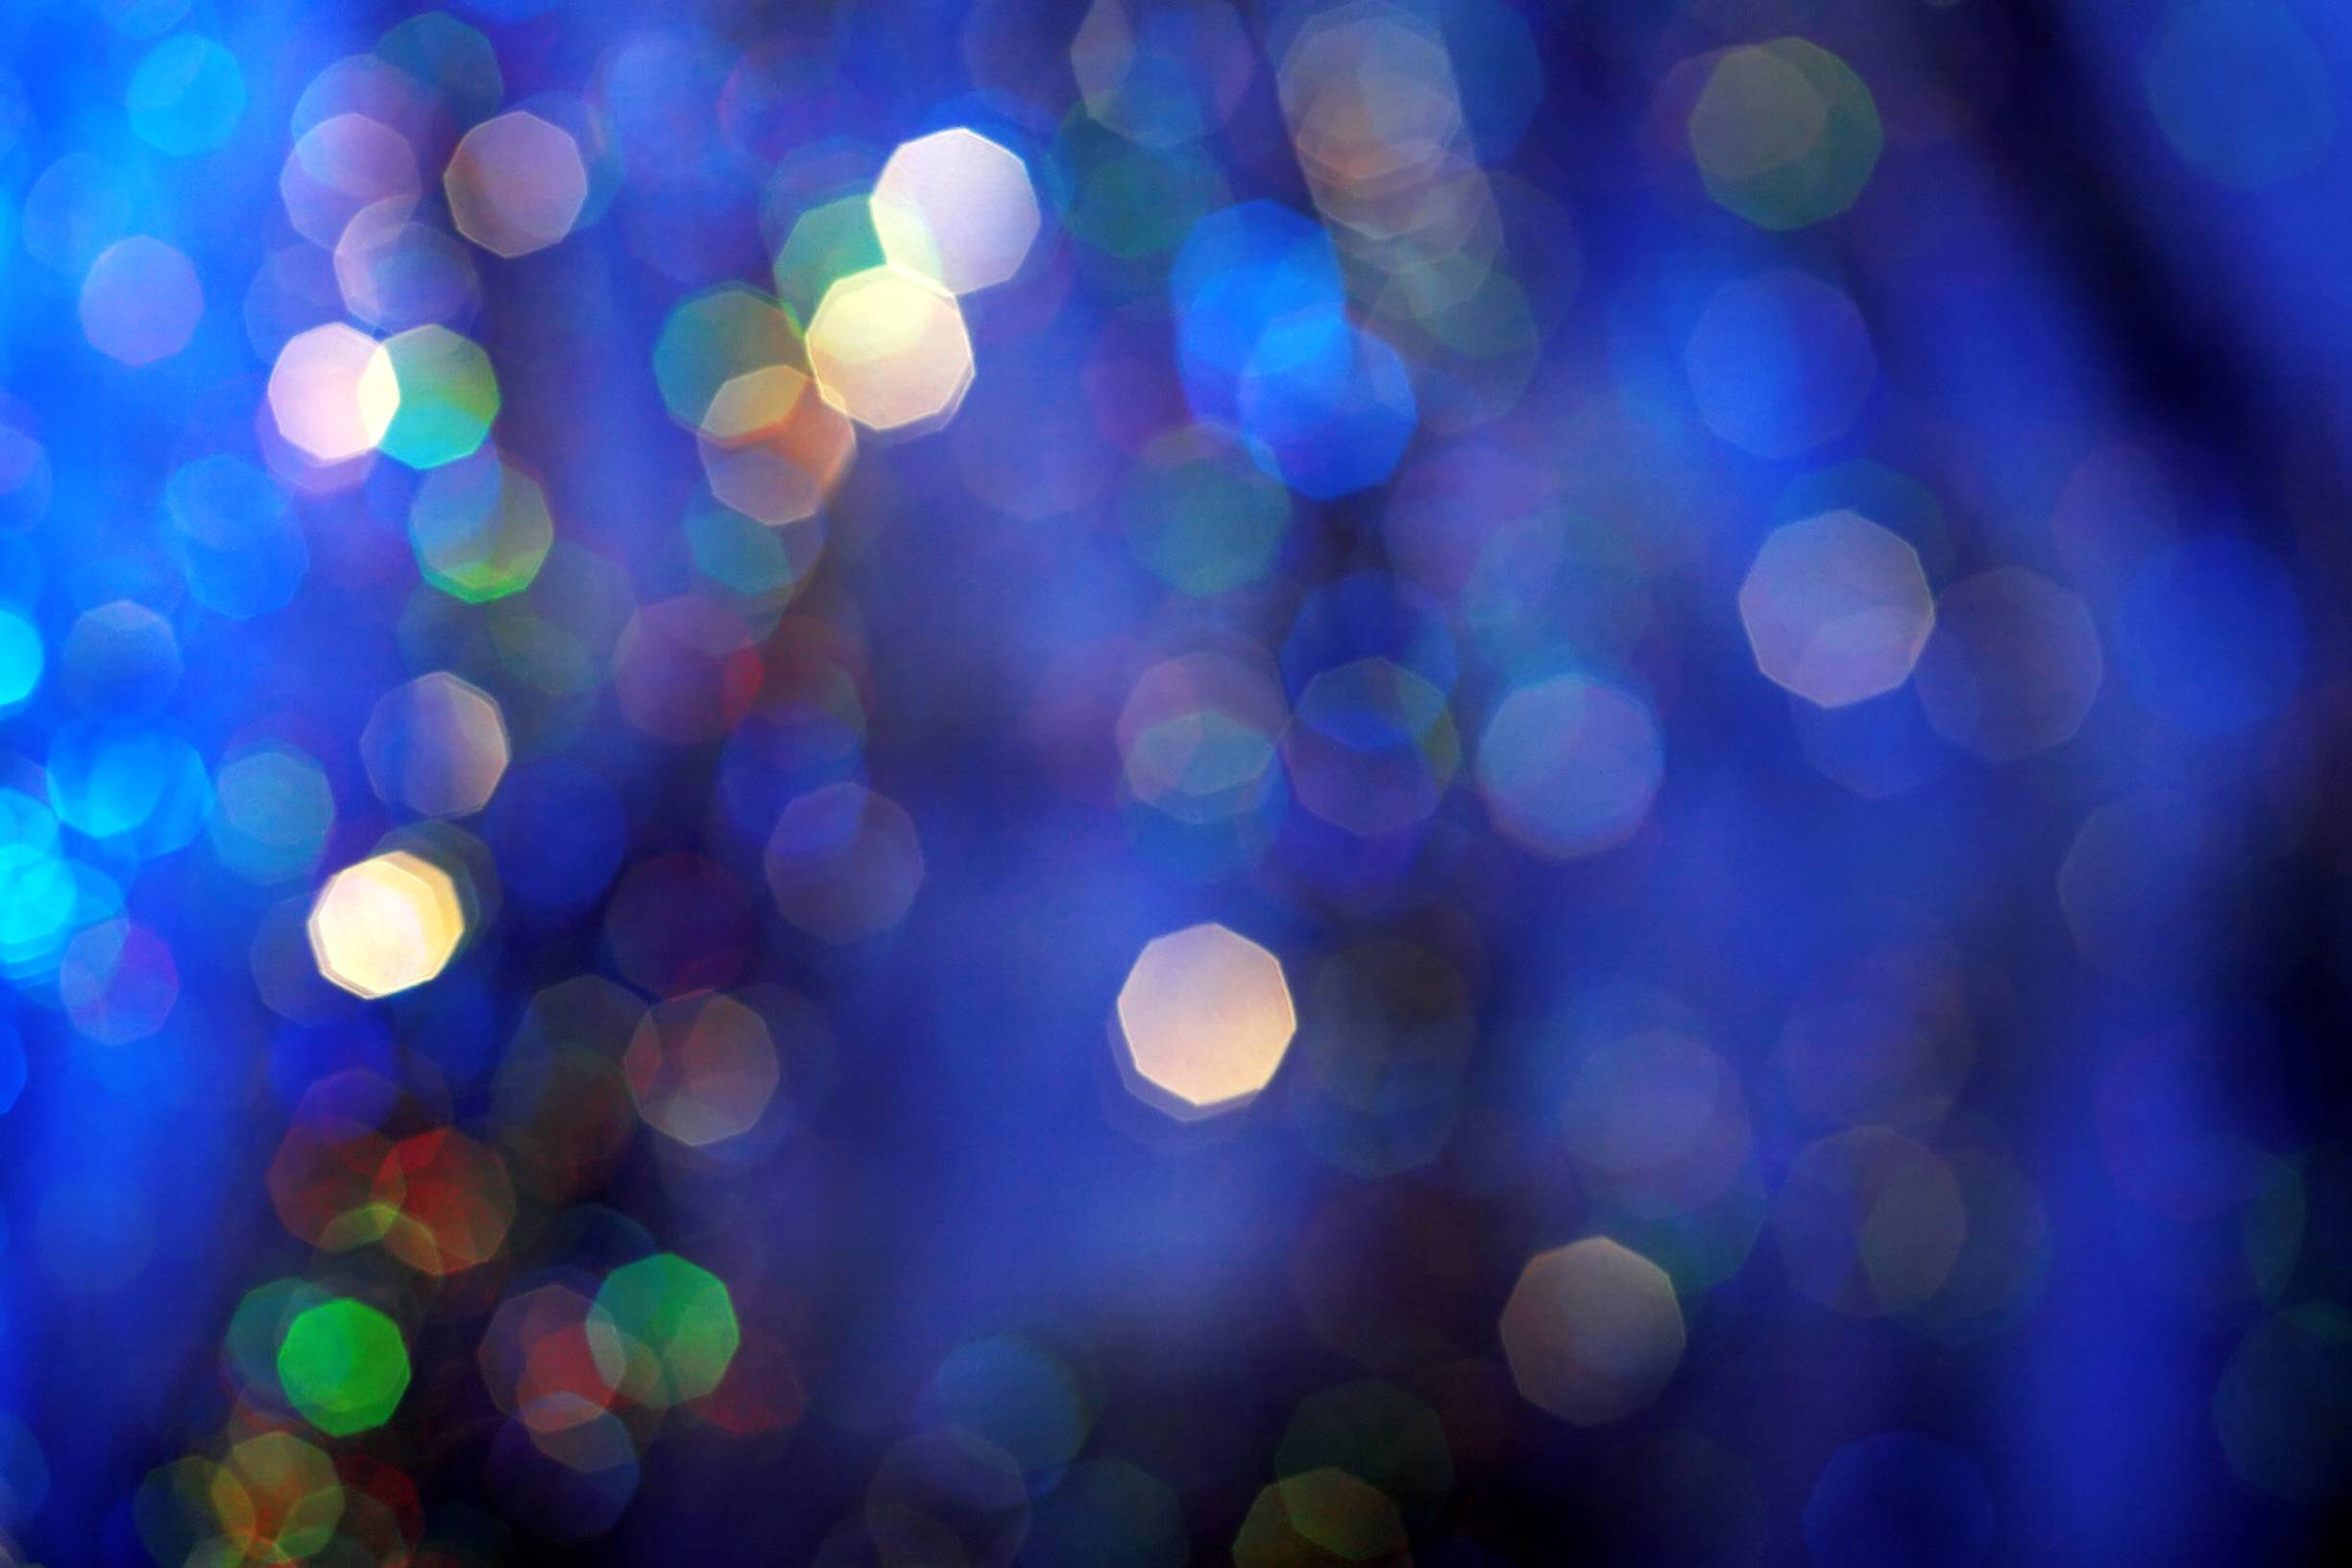 Free Christmas light background from Depositphotos.comSteps